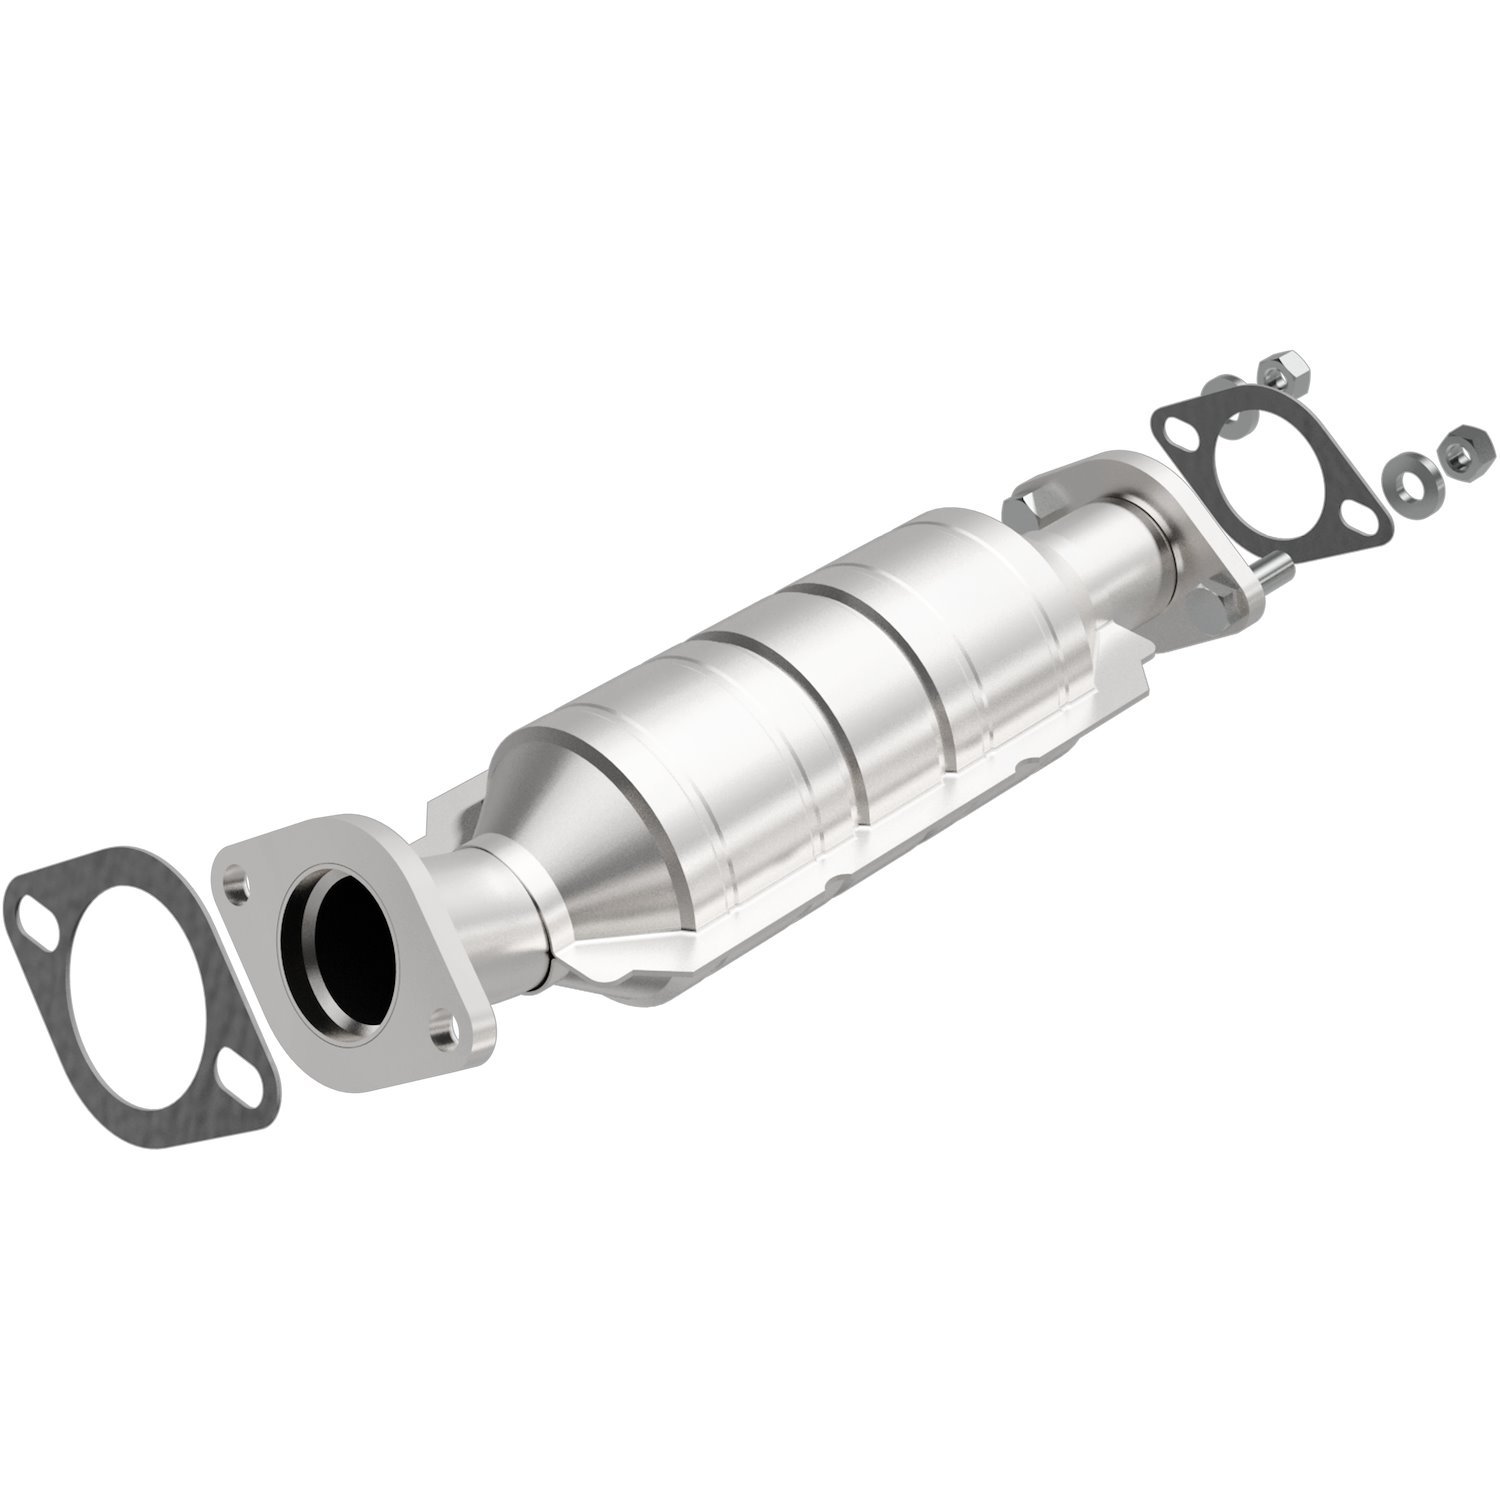 OEM Grade Federal / EPA Compliant Direct-Fit Catalytic Converter 51266